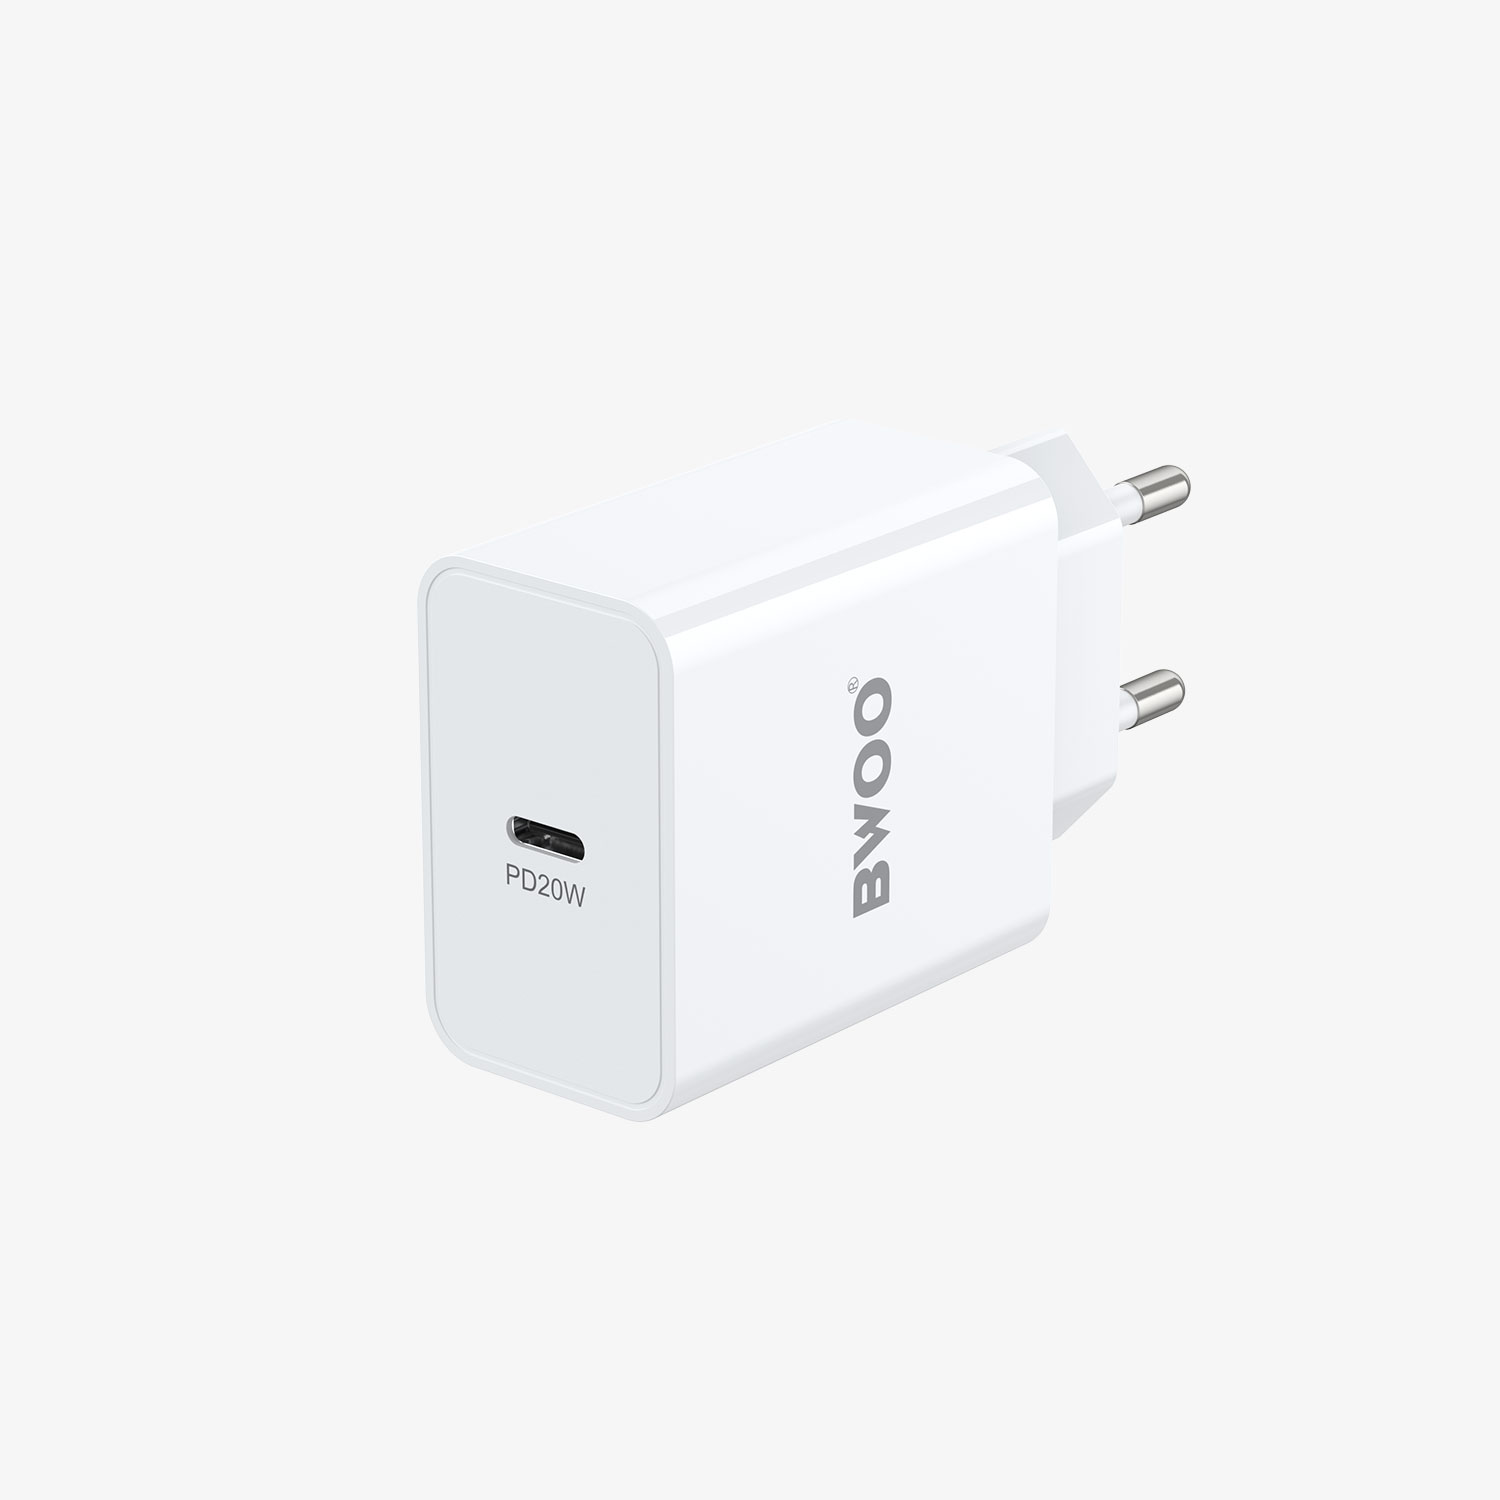 20W iPhone Charger